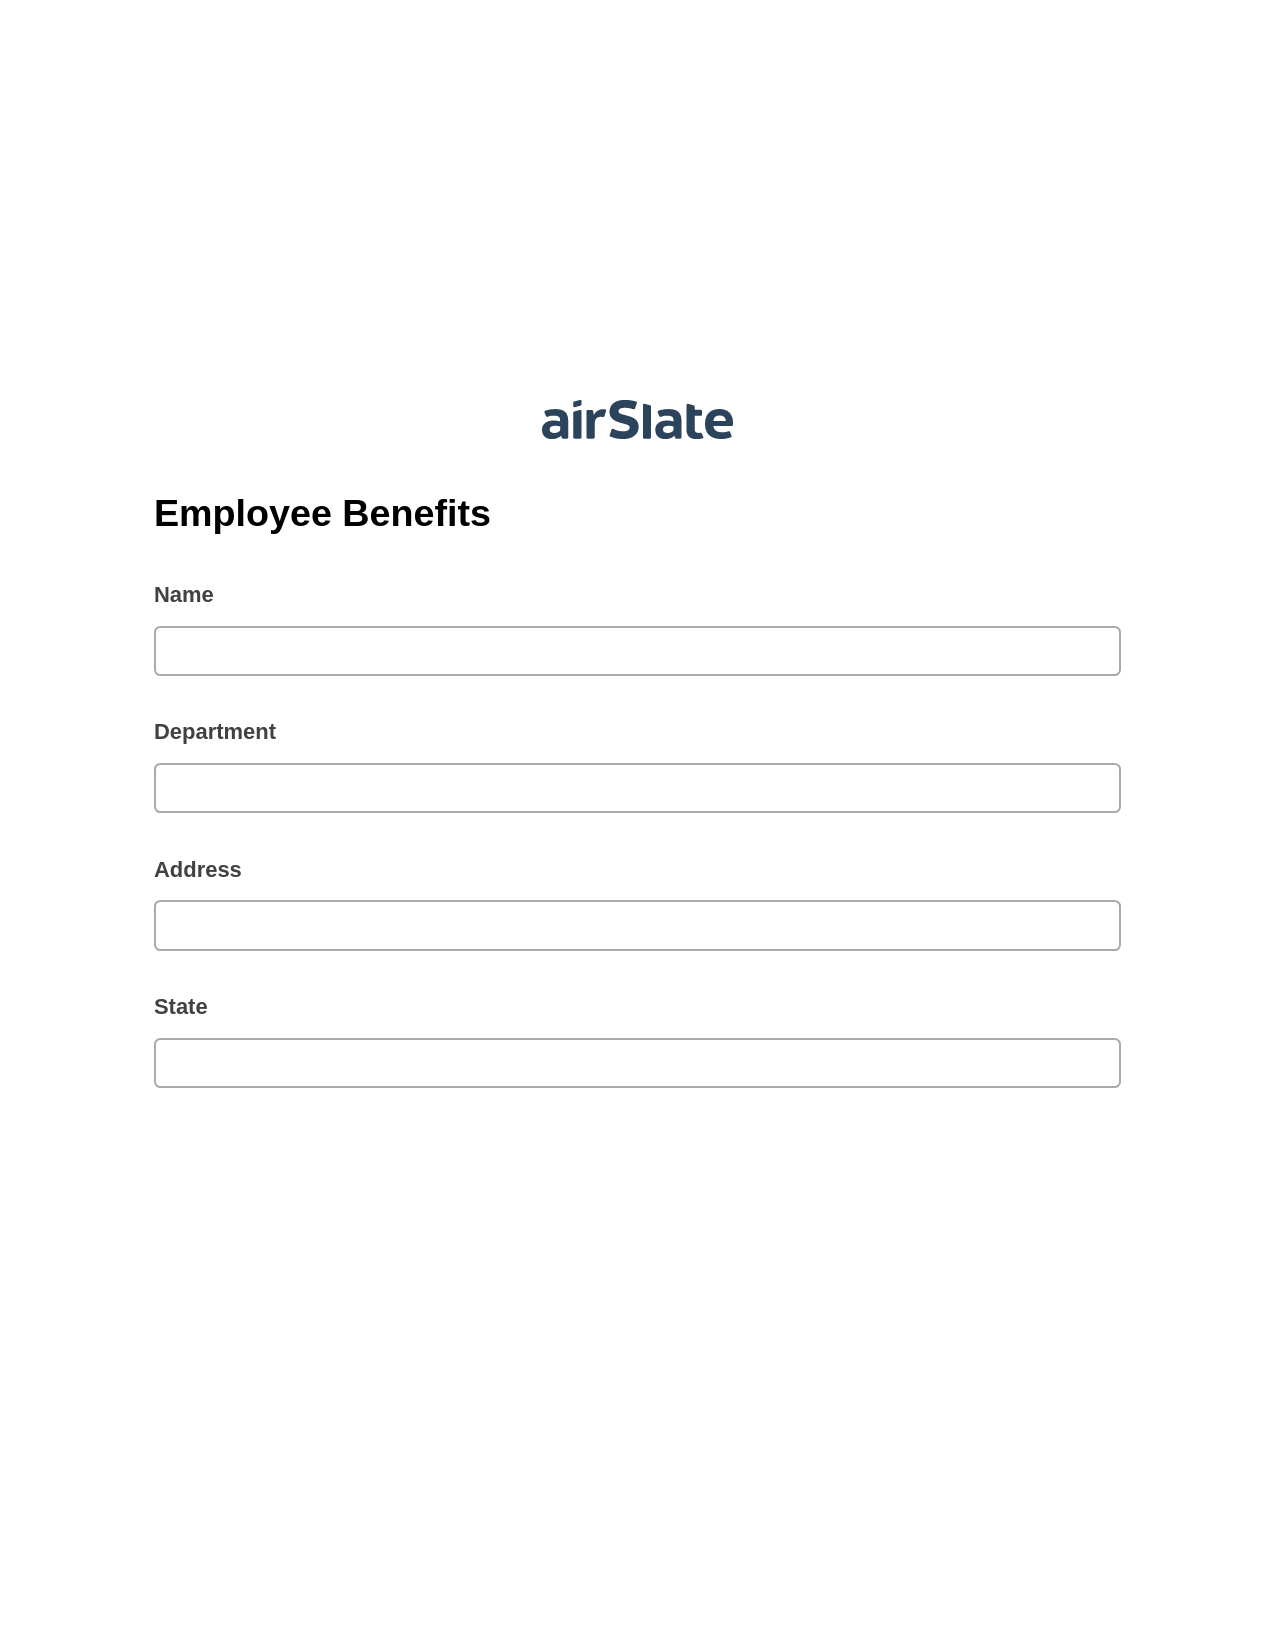 Multirole Employee Benefits Pre-fill from CSV File Bot, Assign Roles to Recipients Bot, Export to MySQL Bot